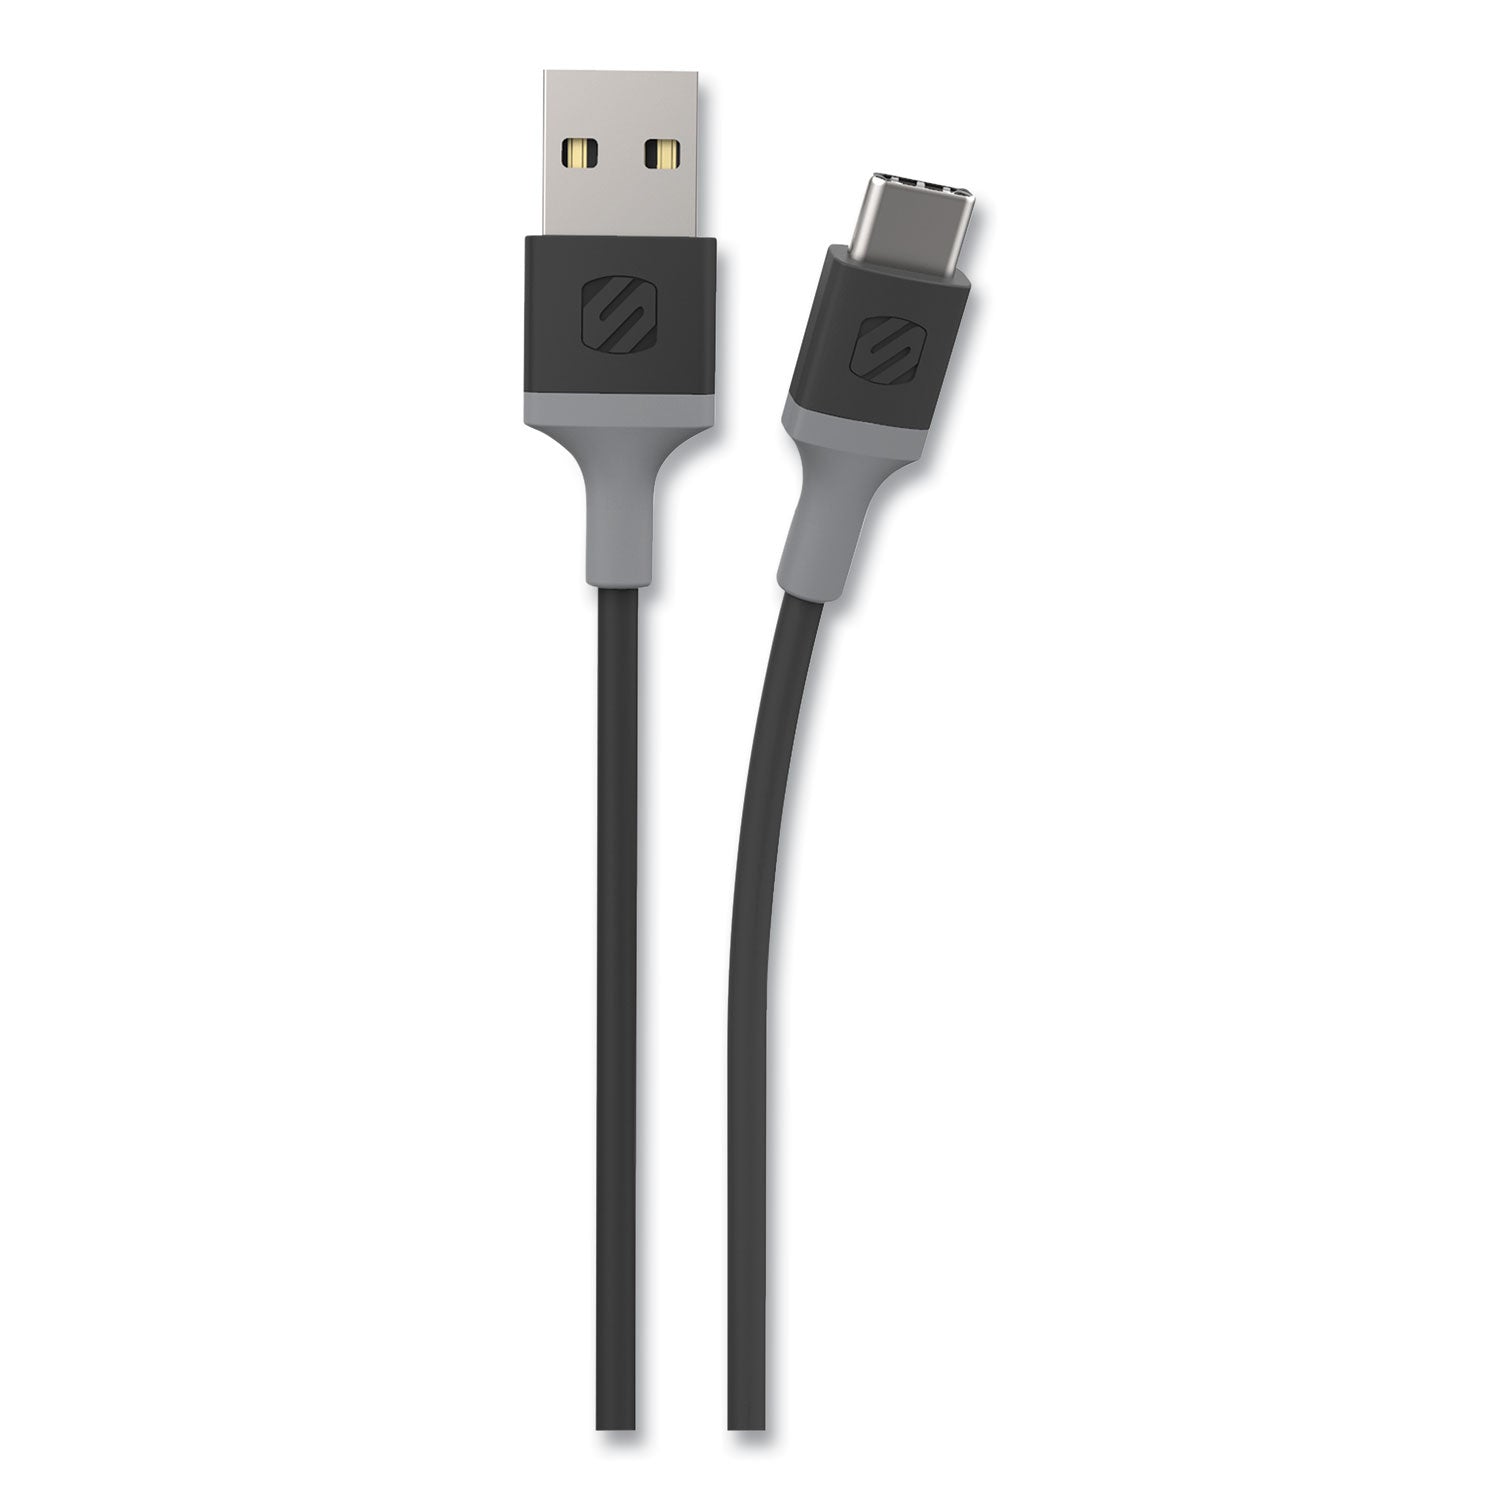 strikeline-braided-cable-for-usb-c-devices-4-ft-black-gray_sosca4bysp - 1